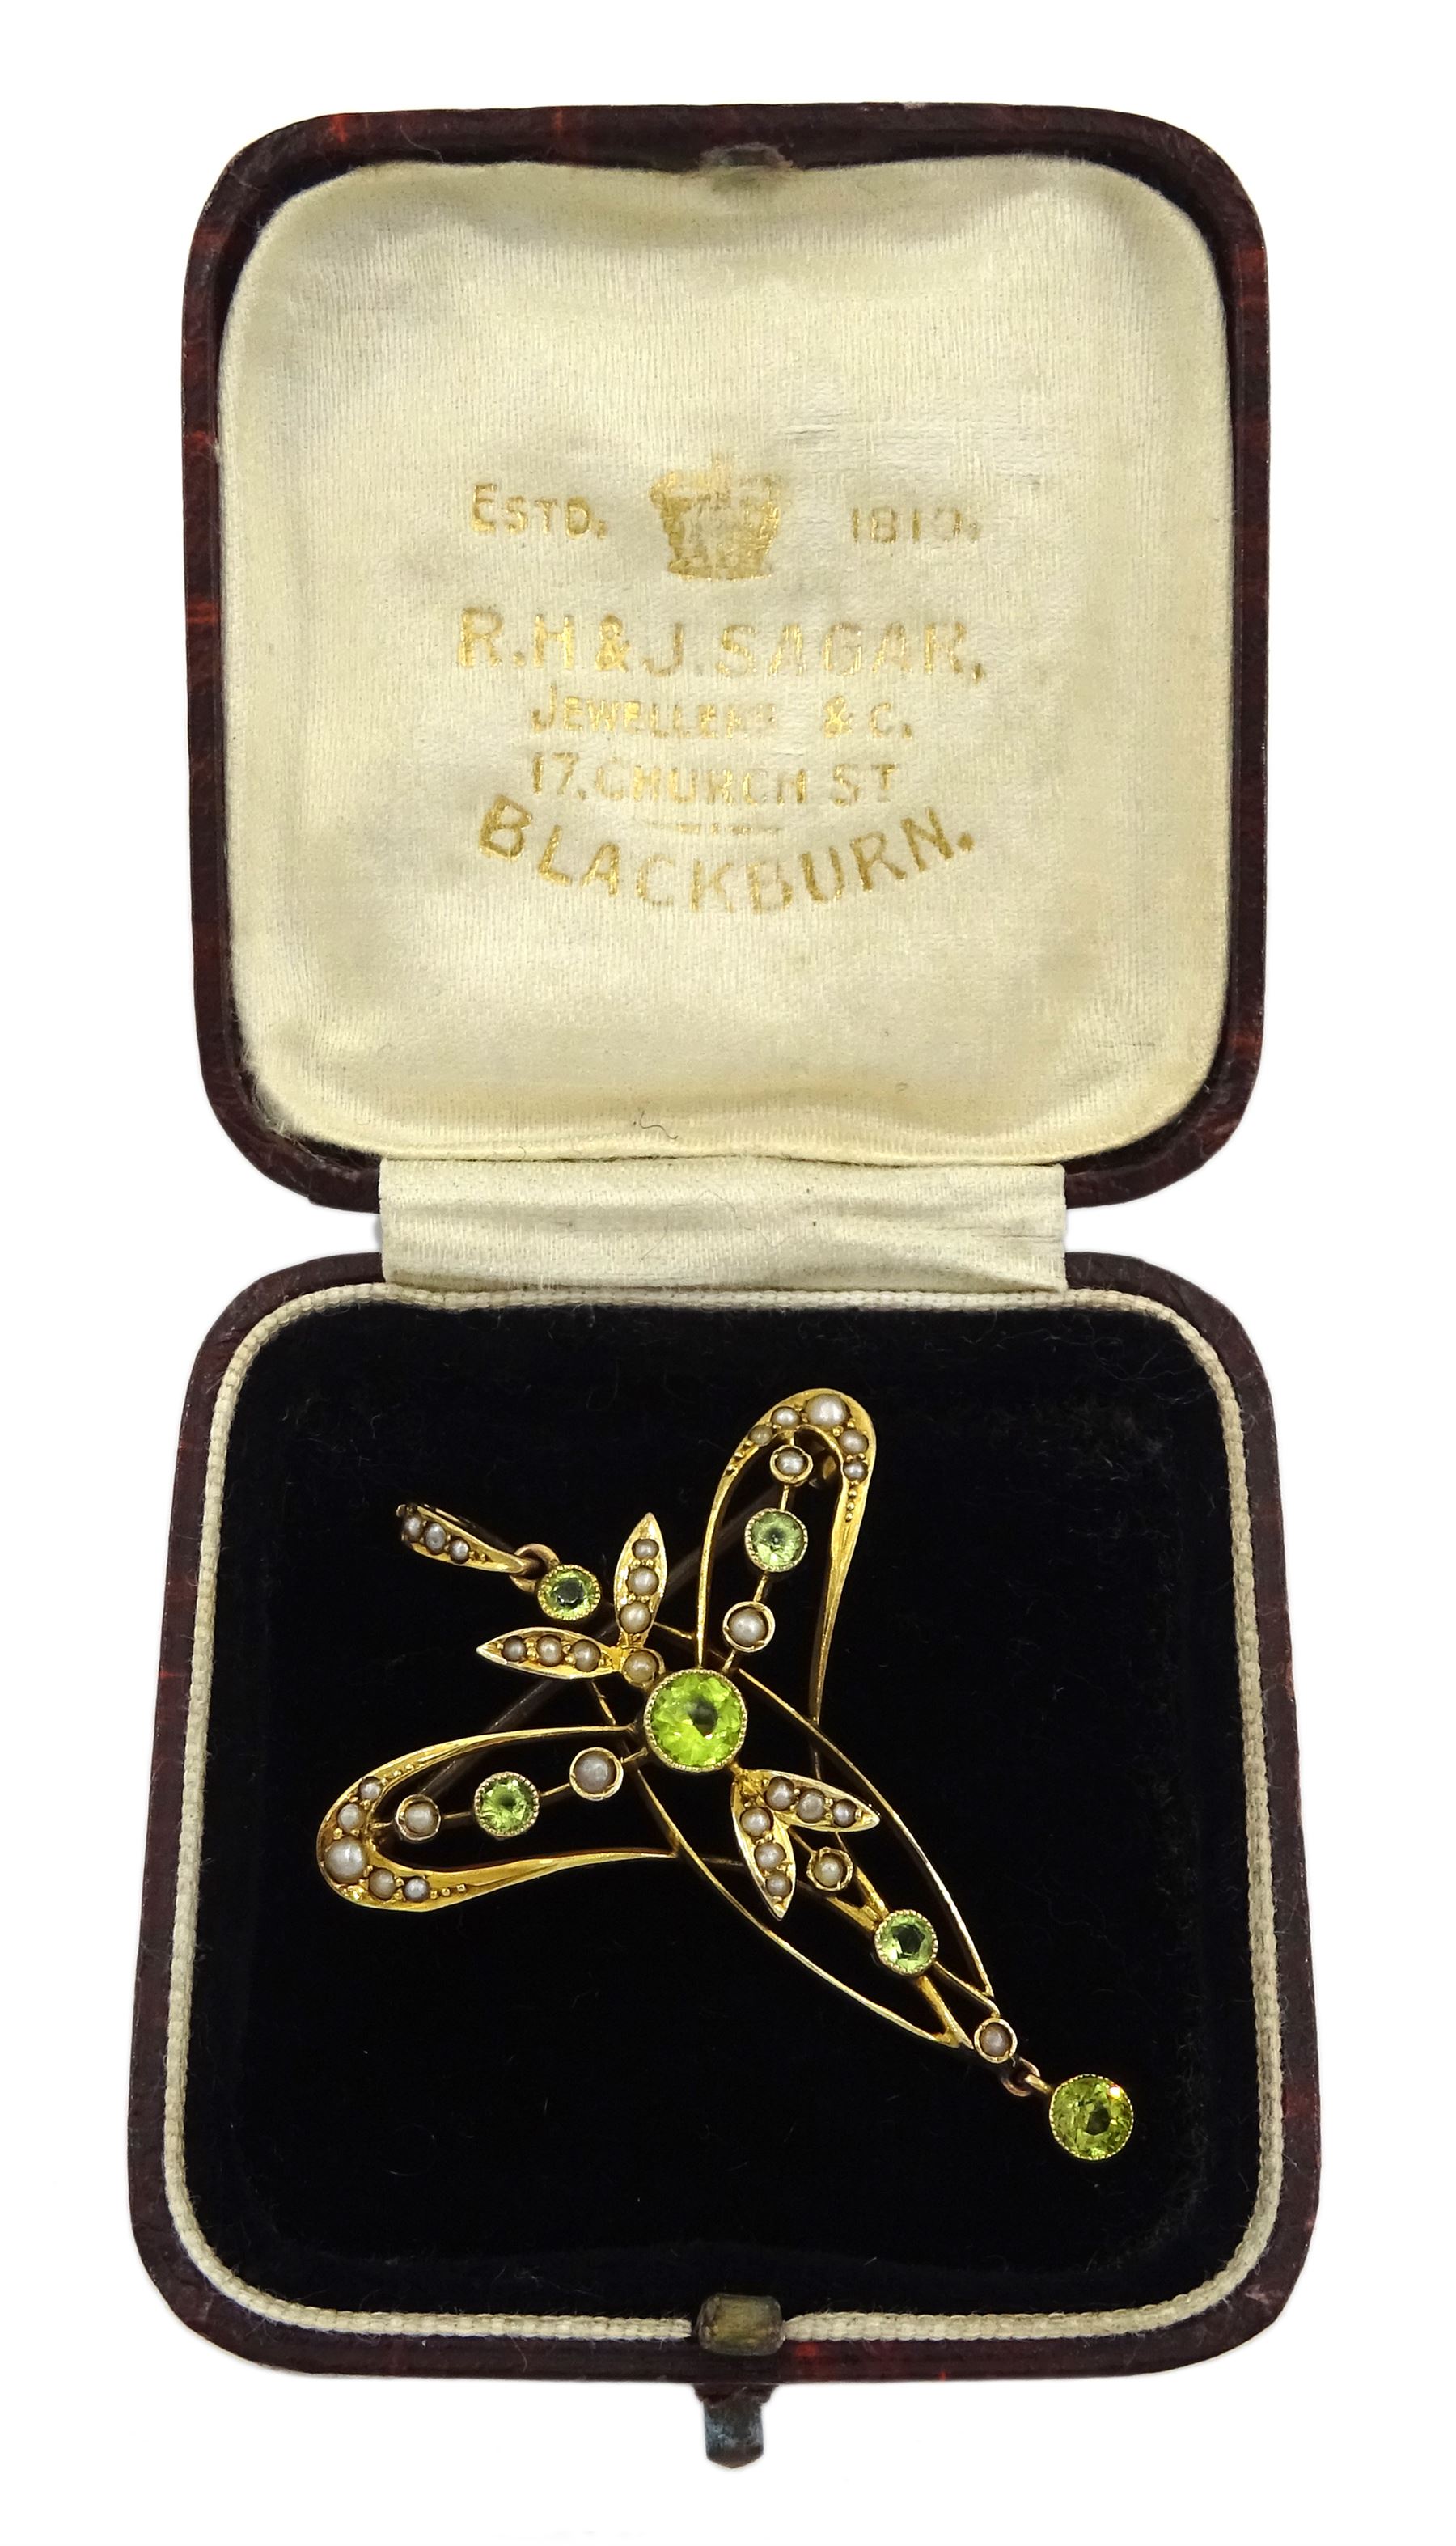 Edwardian Art Nouveau gold peridot and seed pearl pendant/brooch - Image 2 of 4